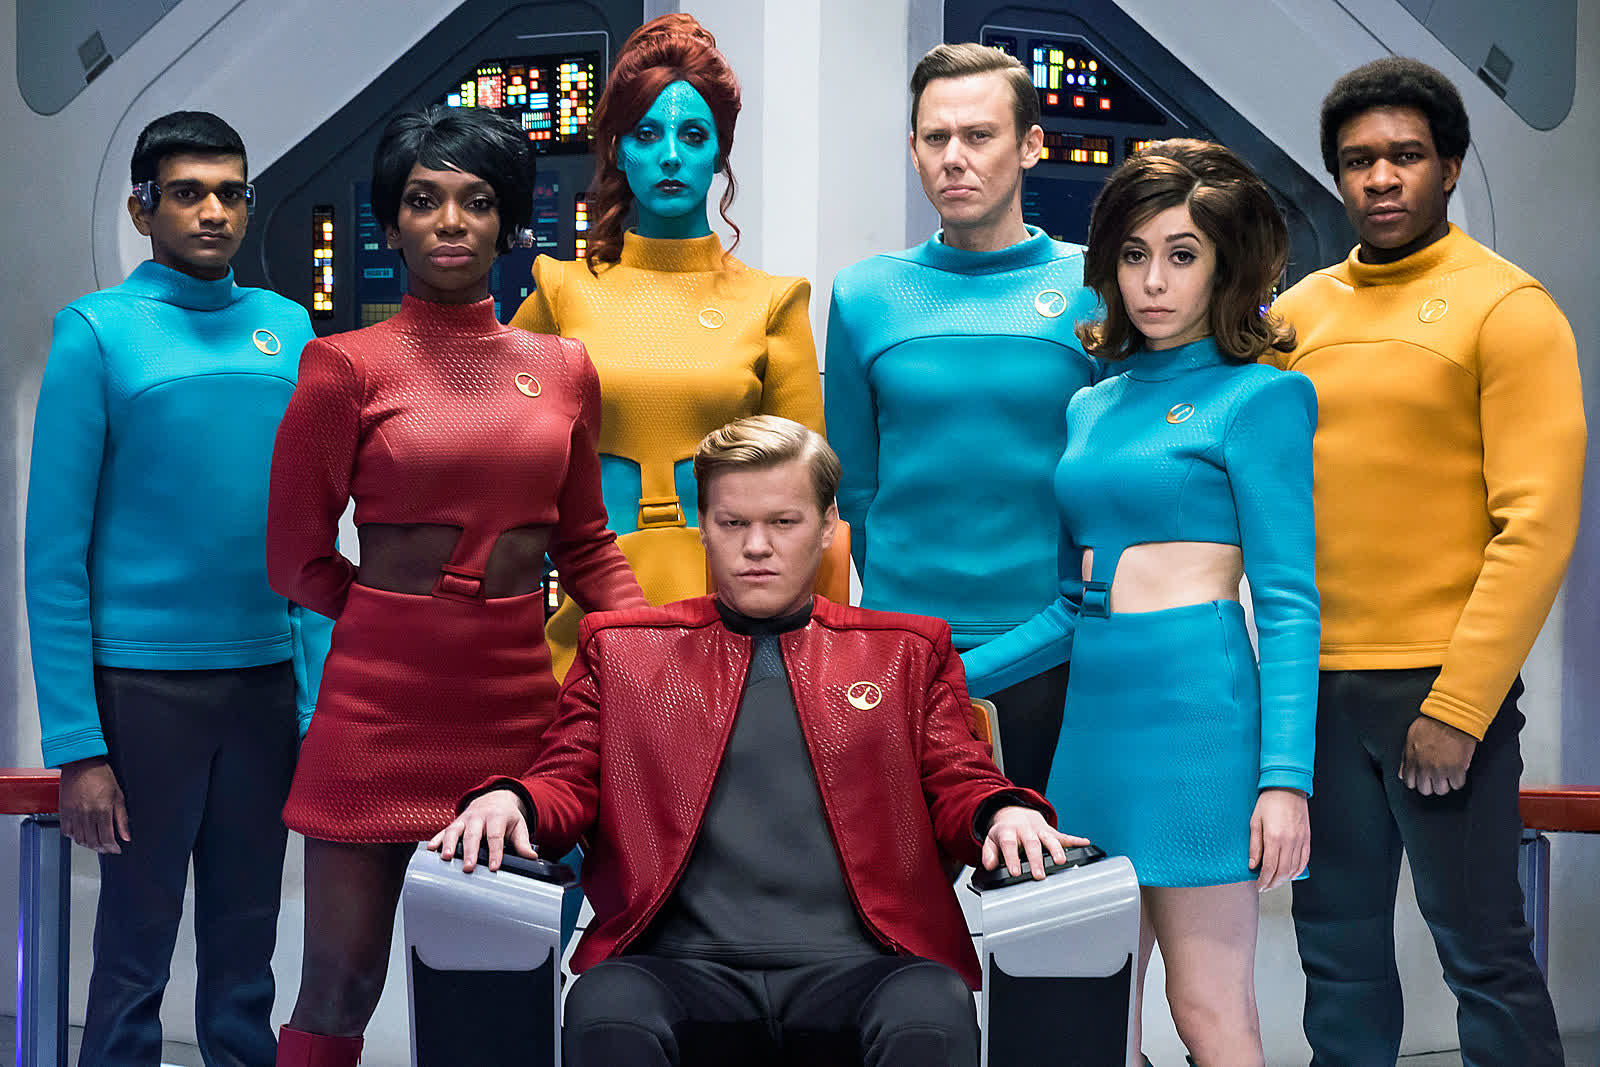 Netflix is working on a longer and more cinematic new season of Black Mirror